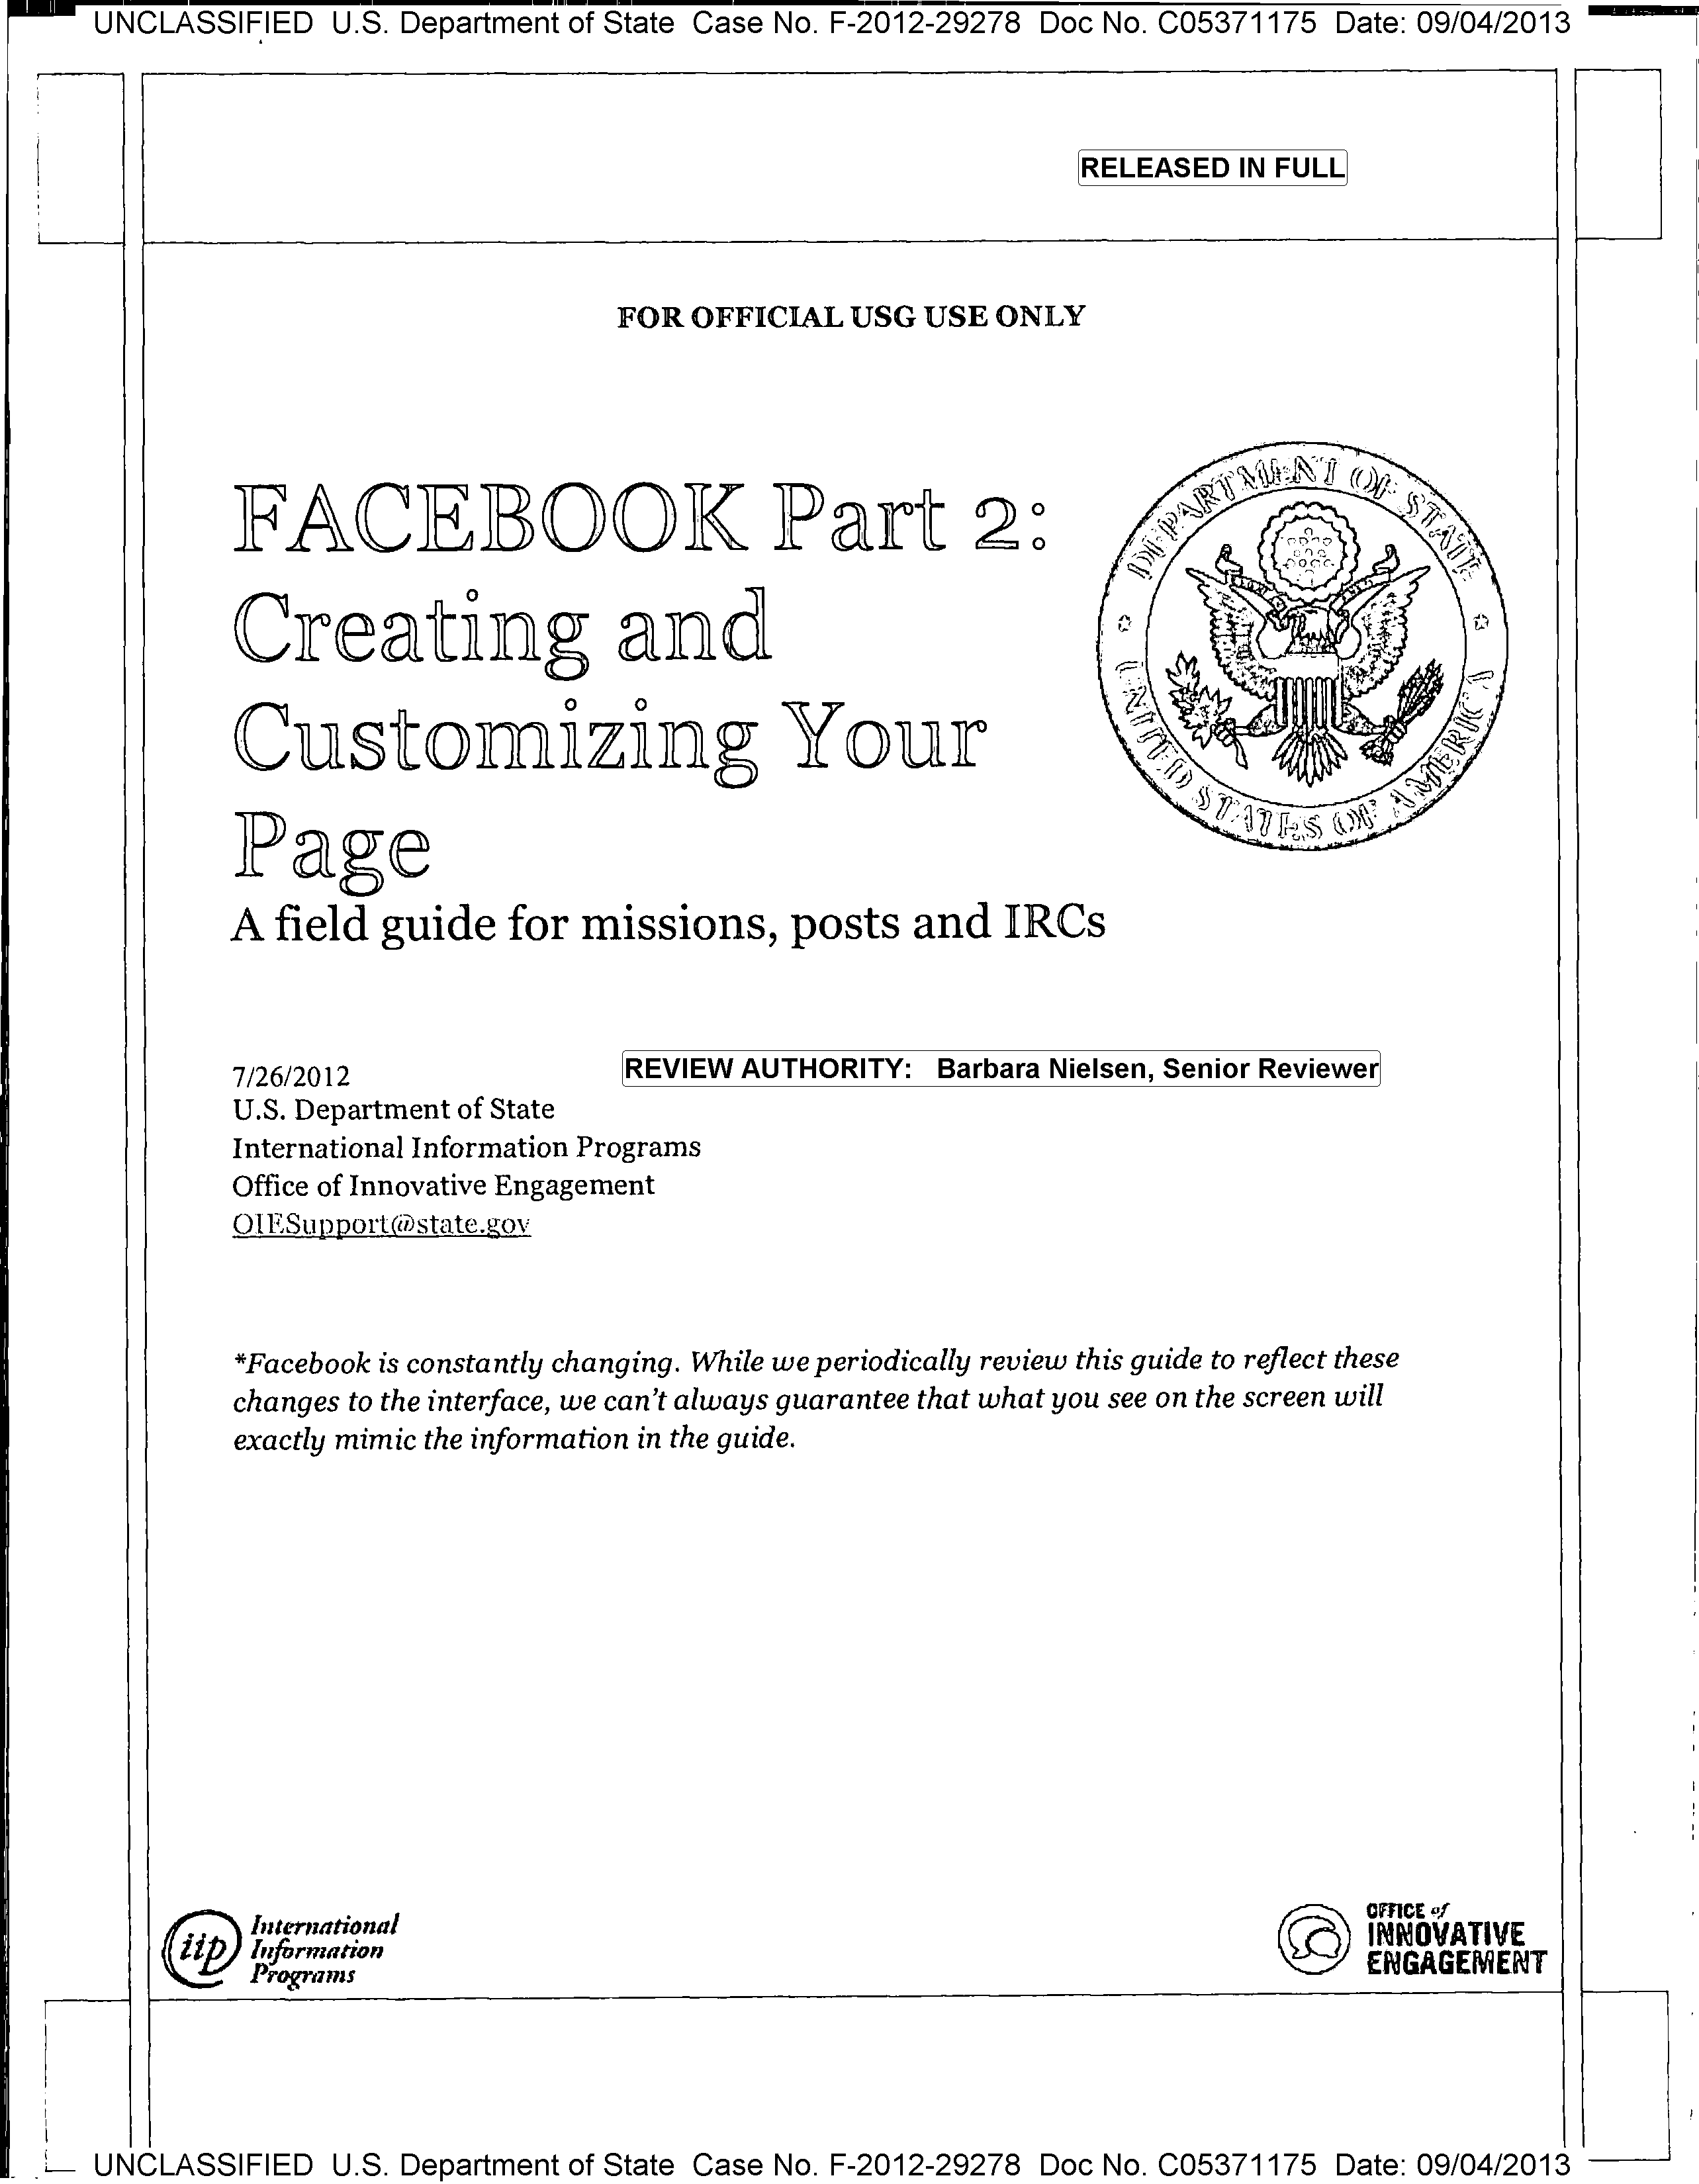 United States. Department of State. Facebook Part 2: Creating and Customizing Your Page - A field guide for missions, posts and IRCs. International Information Programs, Office of Innovative Engagement, Jul. 26, 2012. Judicial Watch v. U.S. State Department, Doc. No. C05371175, Case No. F-2012-29278, 09/04/2013.